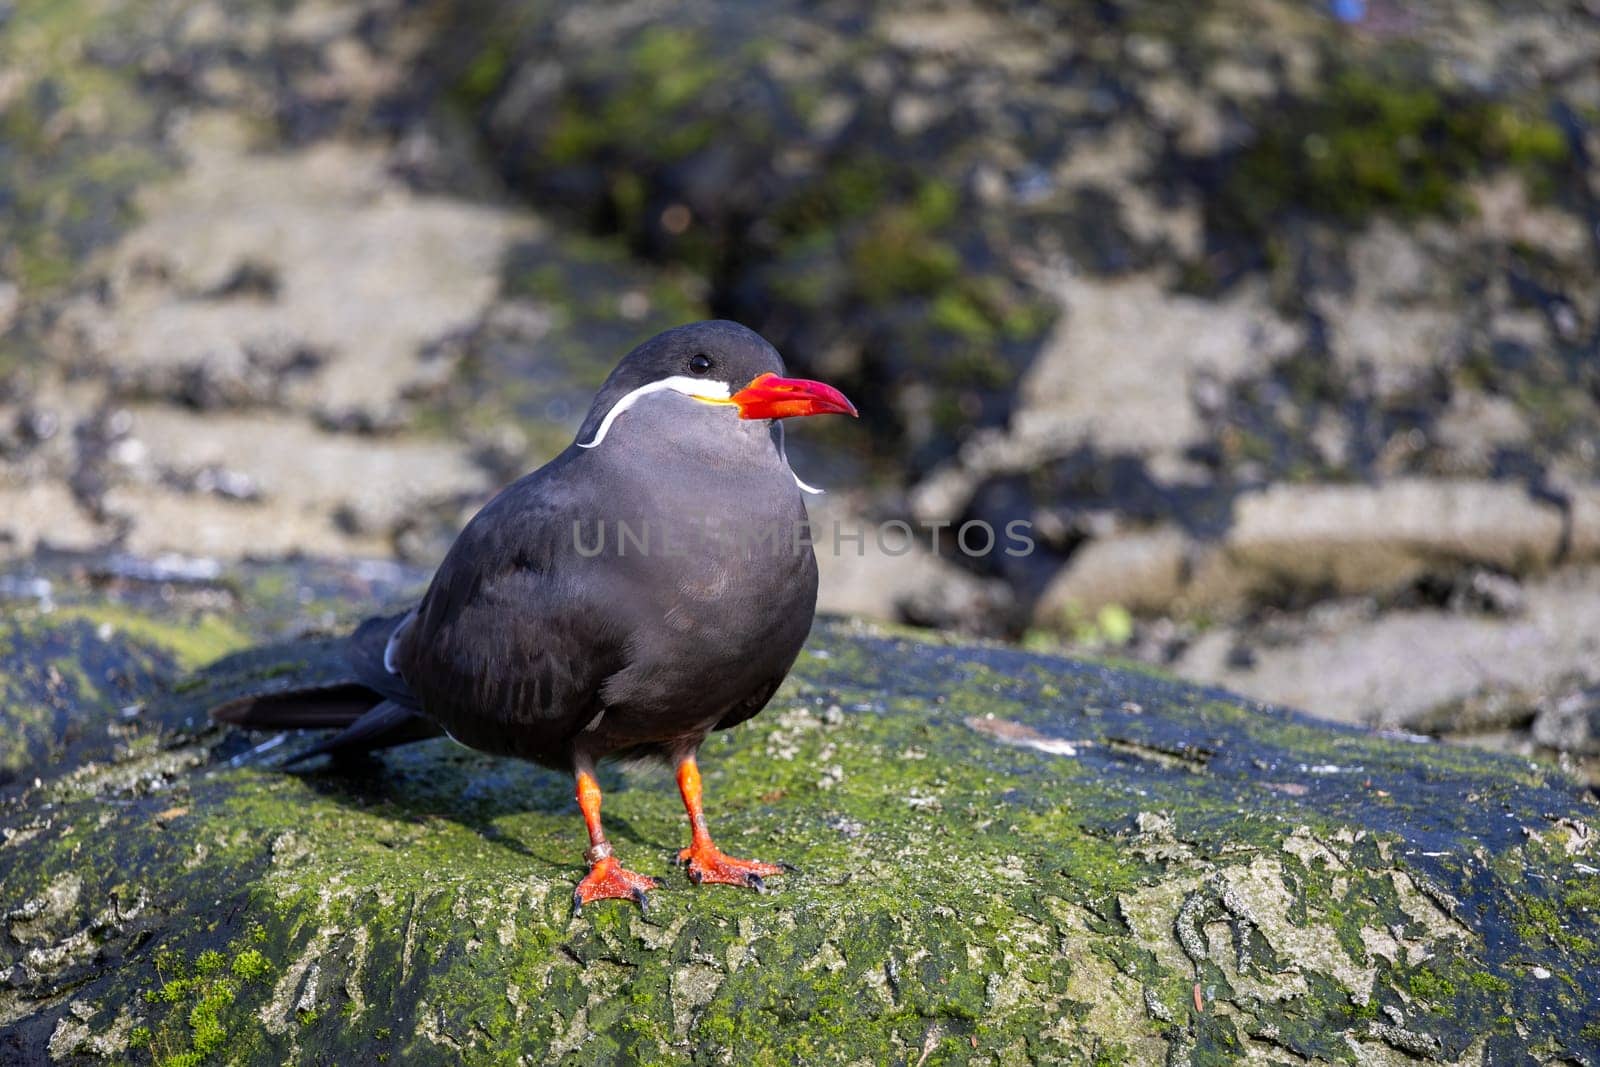 Close-Up Portrait of a Black Inca Tern With a Distinctive Red Beak and White Mustache by exndiver